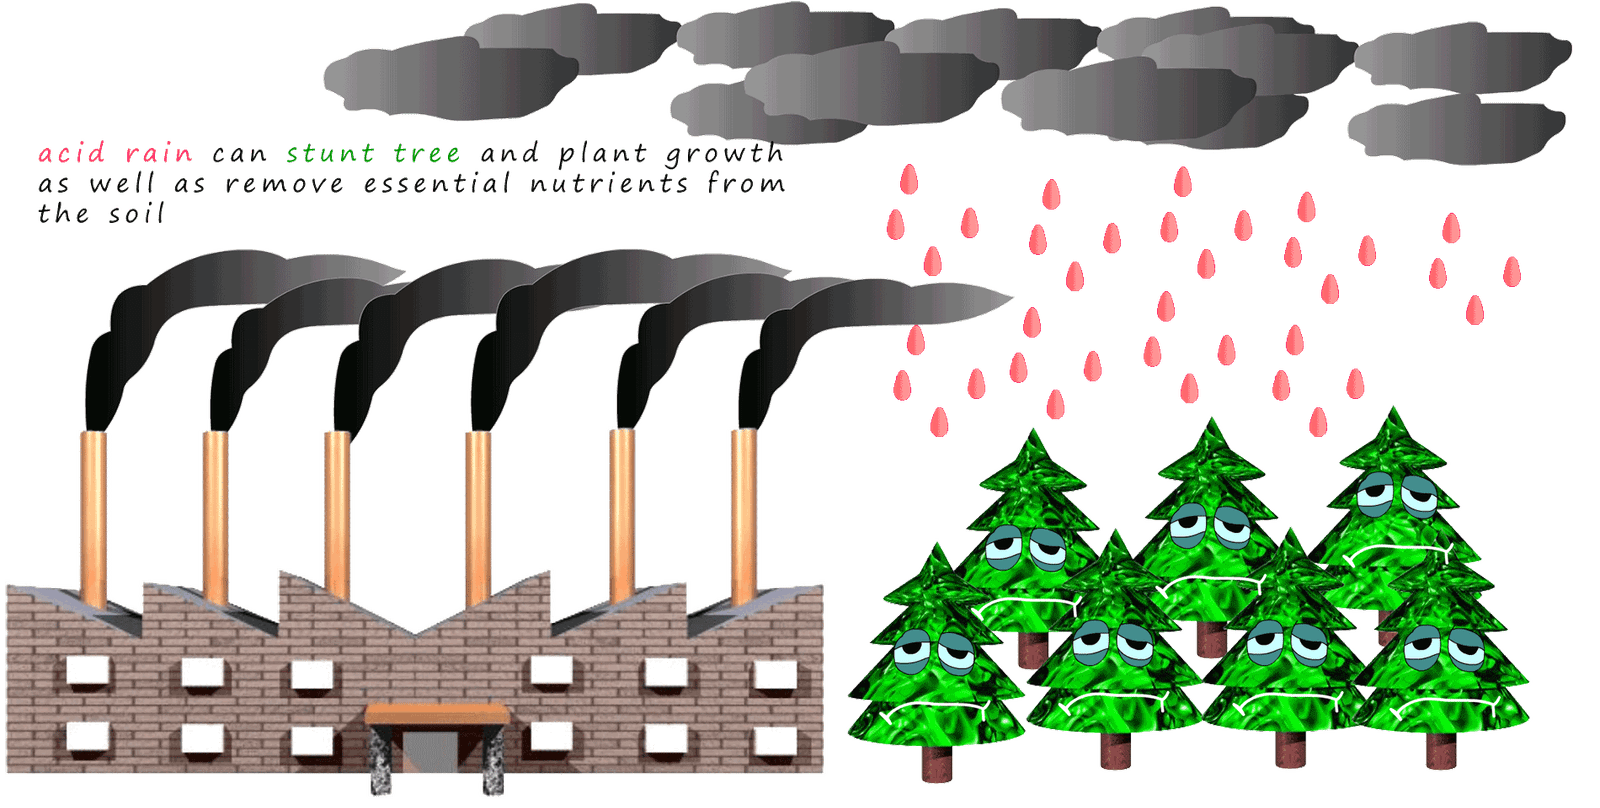 The effects of acid rain on trees and the soil.